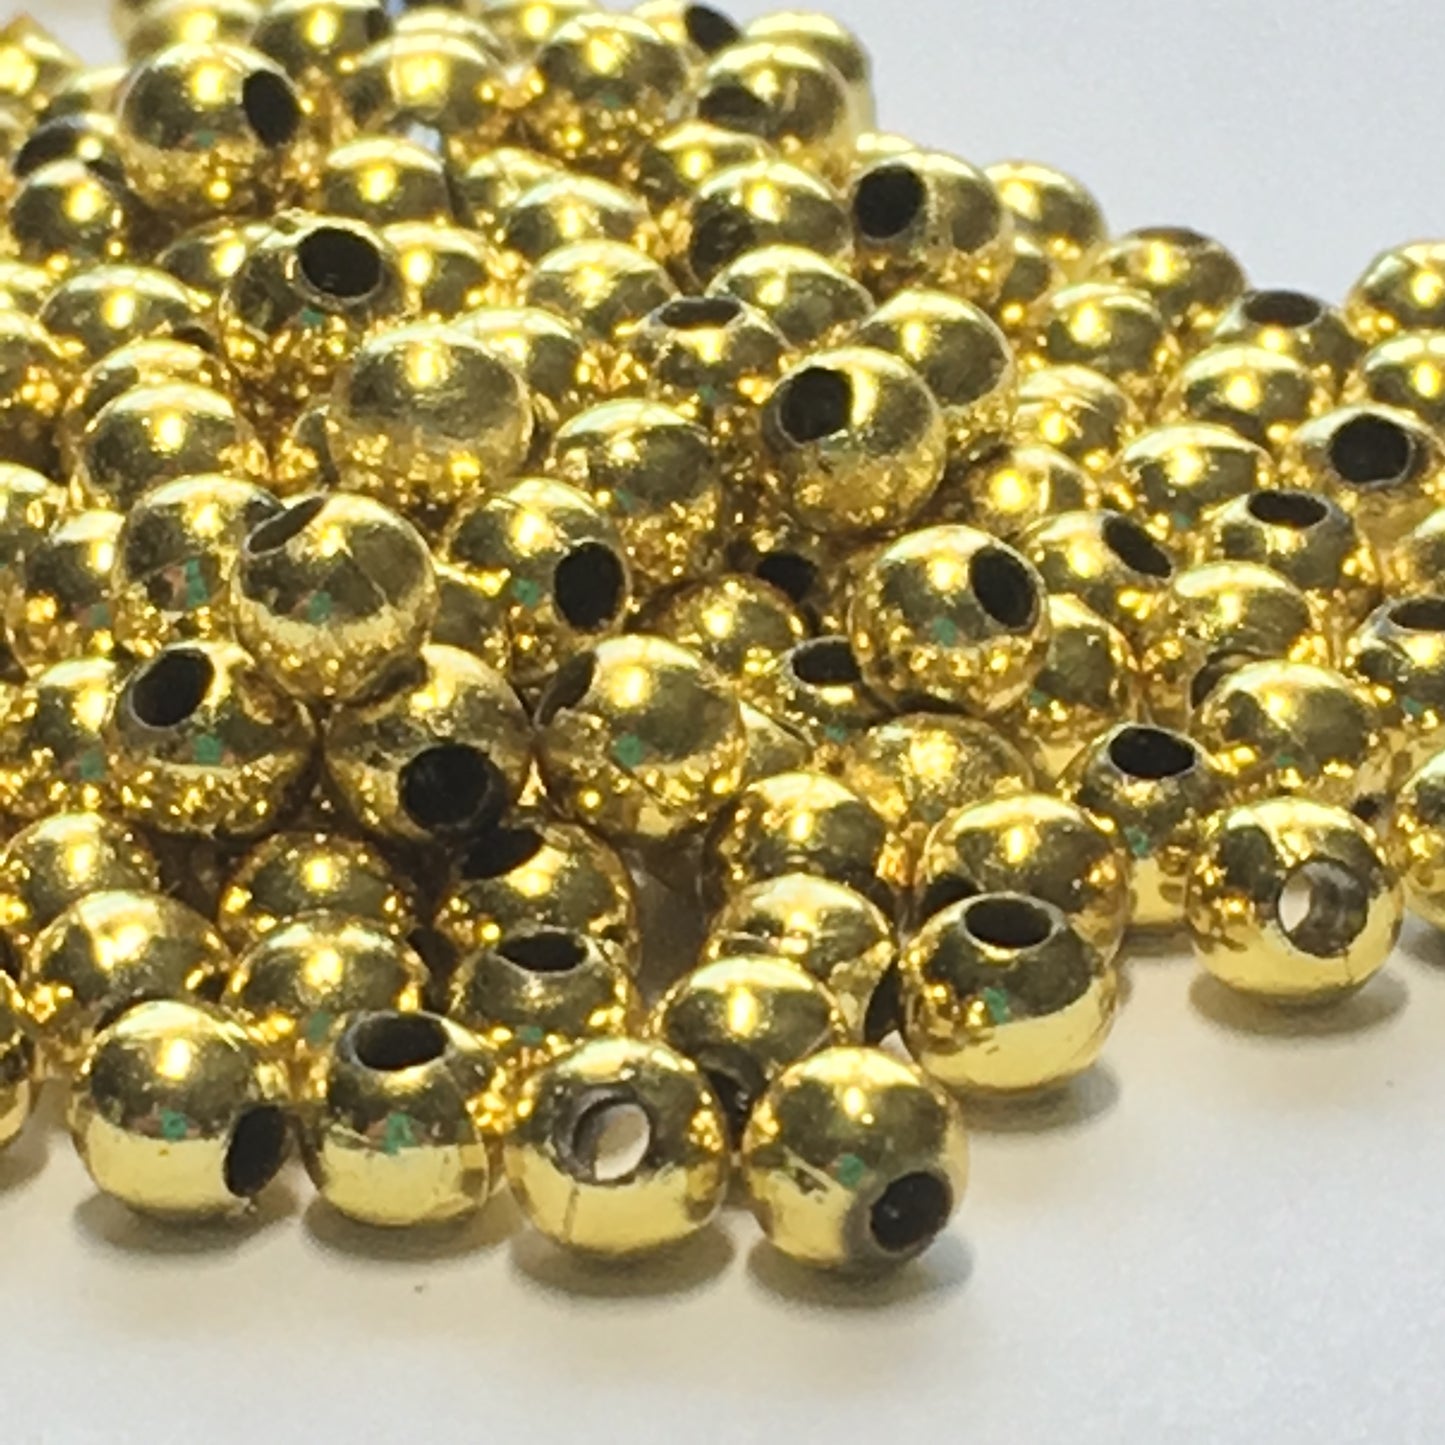 Gold Acrylic Round Beads, 4 mm - Approximately 200 Beads